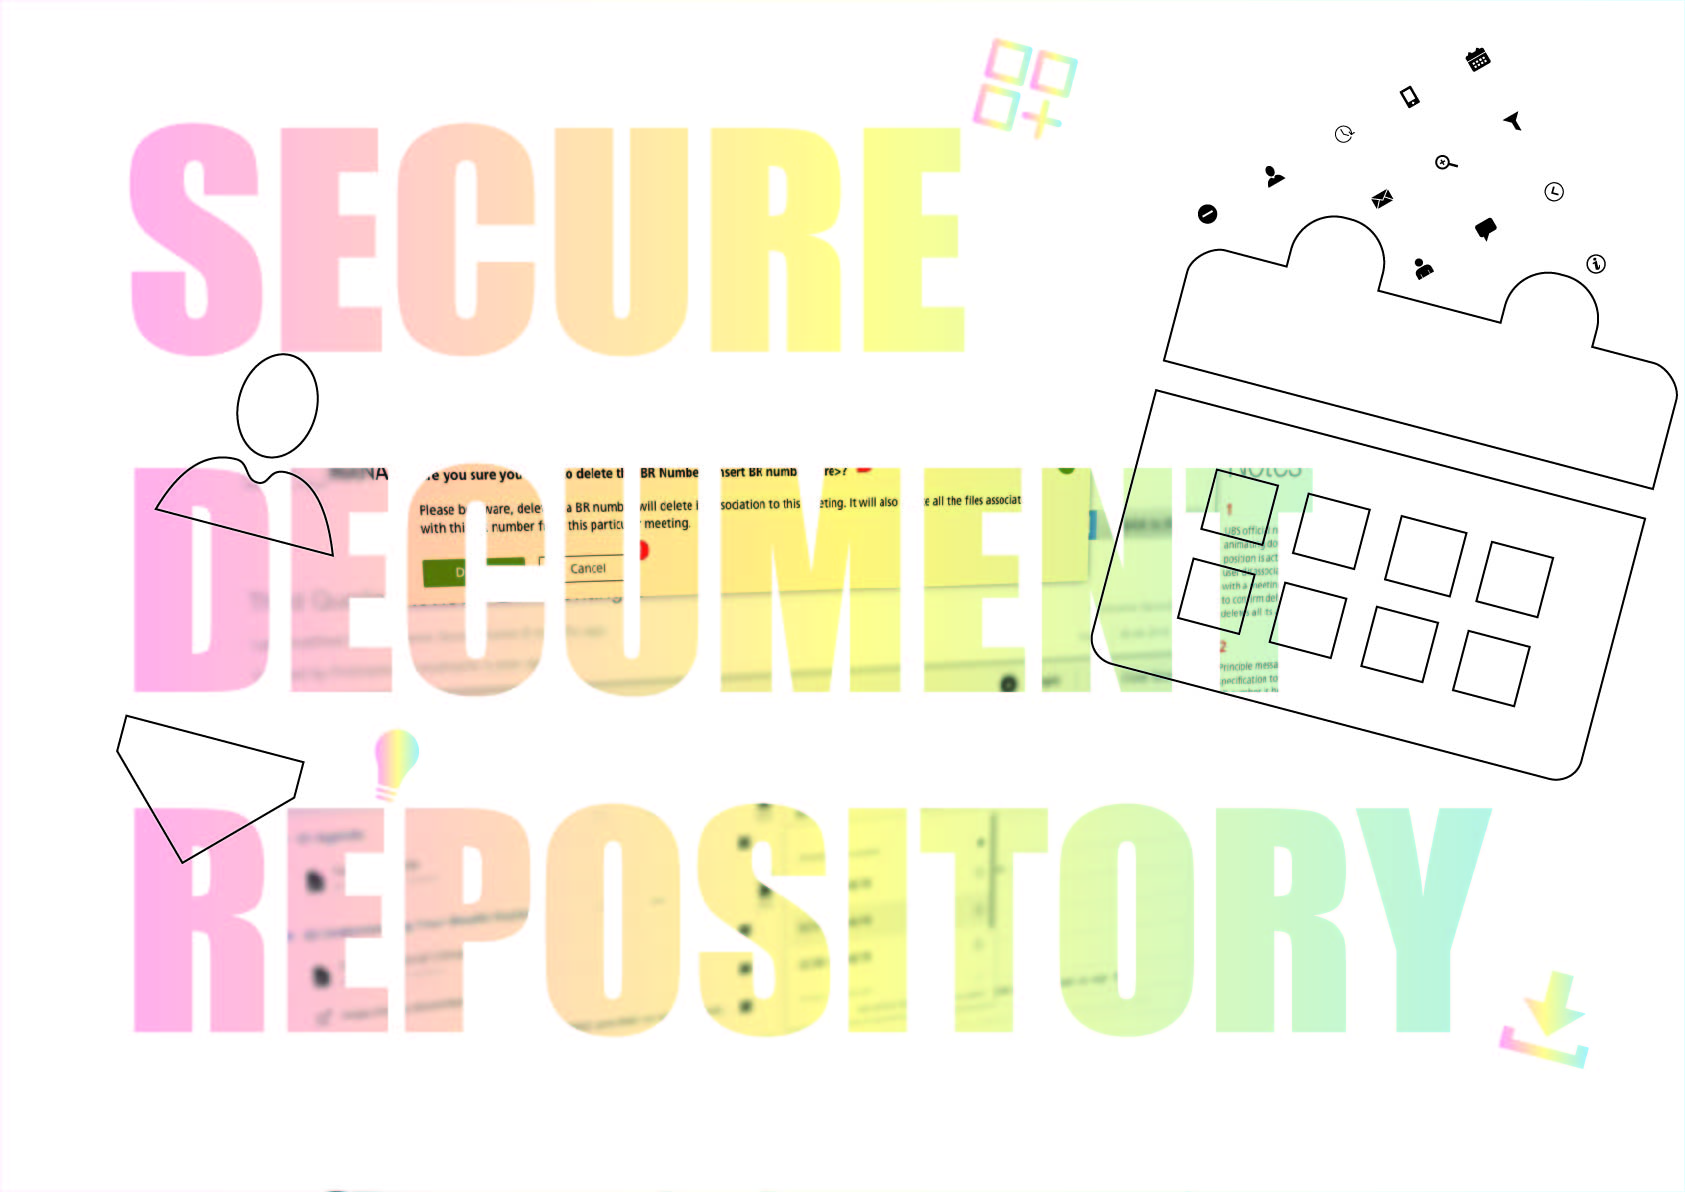 Part I – Designing a Secure Document Repository